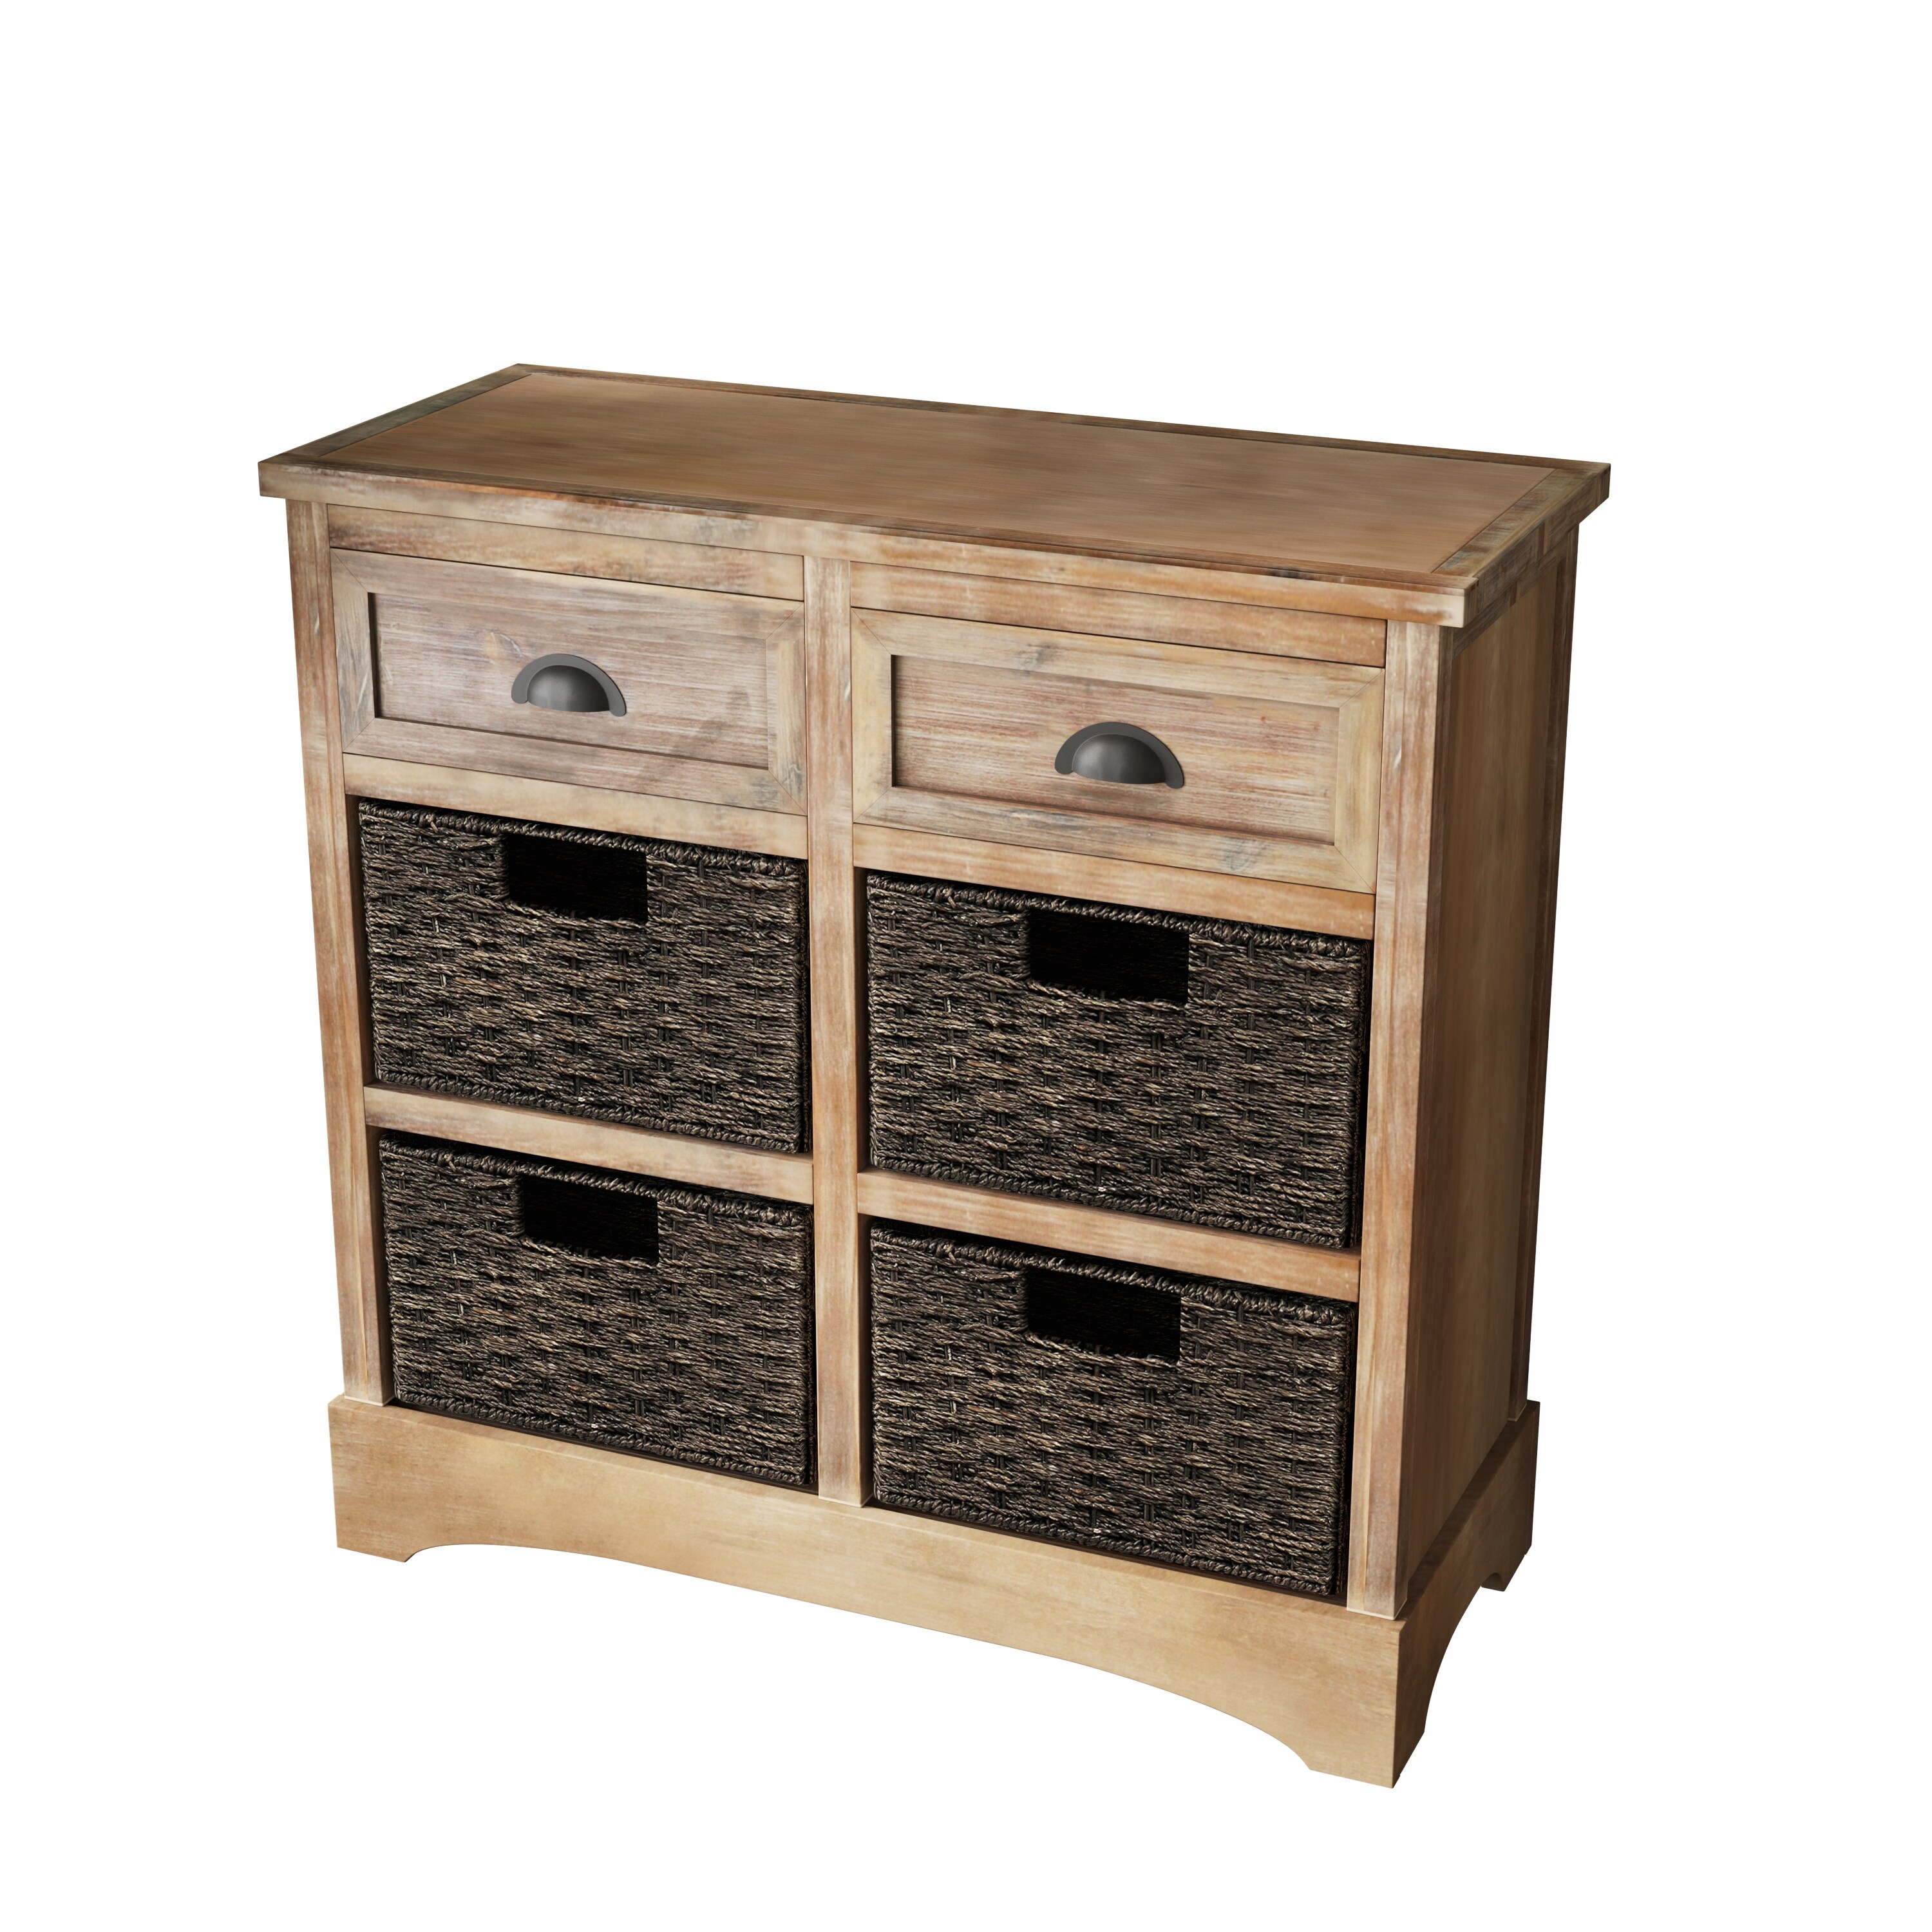 https://ak1.ostkcdn.com/images/products/is/images/direct/0b416c1a0fa036e745d33a3f9a4f5eb40ff85de3/Rustic-Storage-Cabinet-with-Two-Drawers-and-Four-Classic-Rattan-Basket-for-Dining-Room-Living-Room.jpg